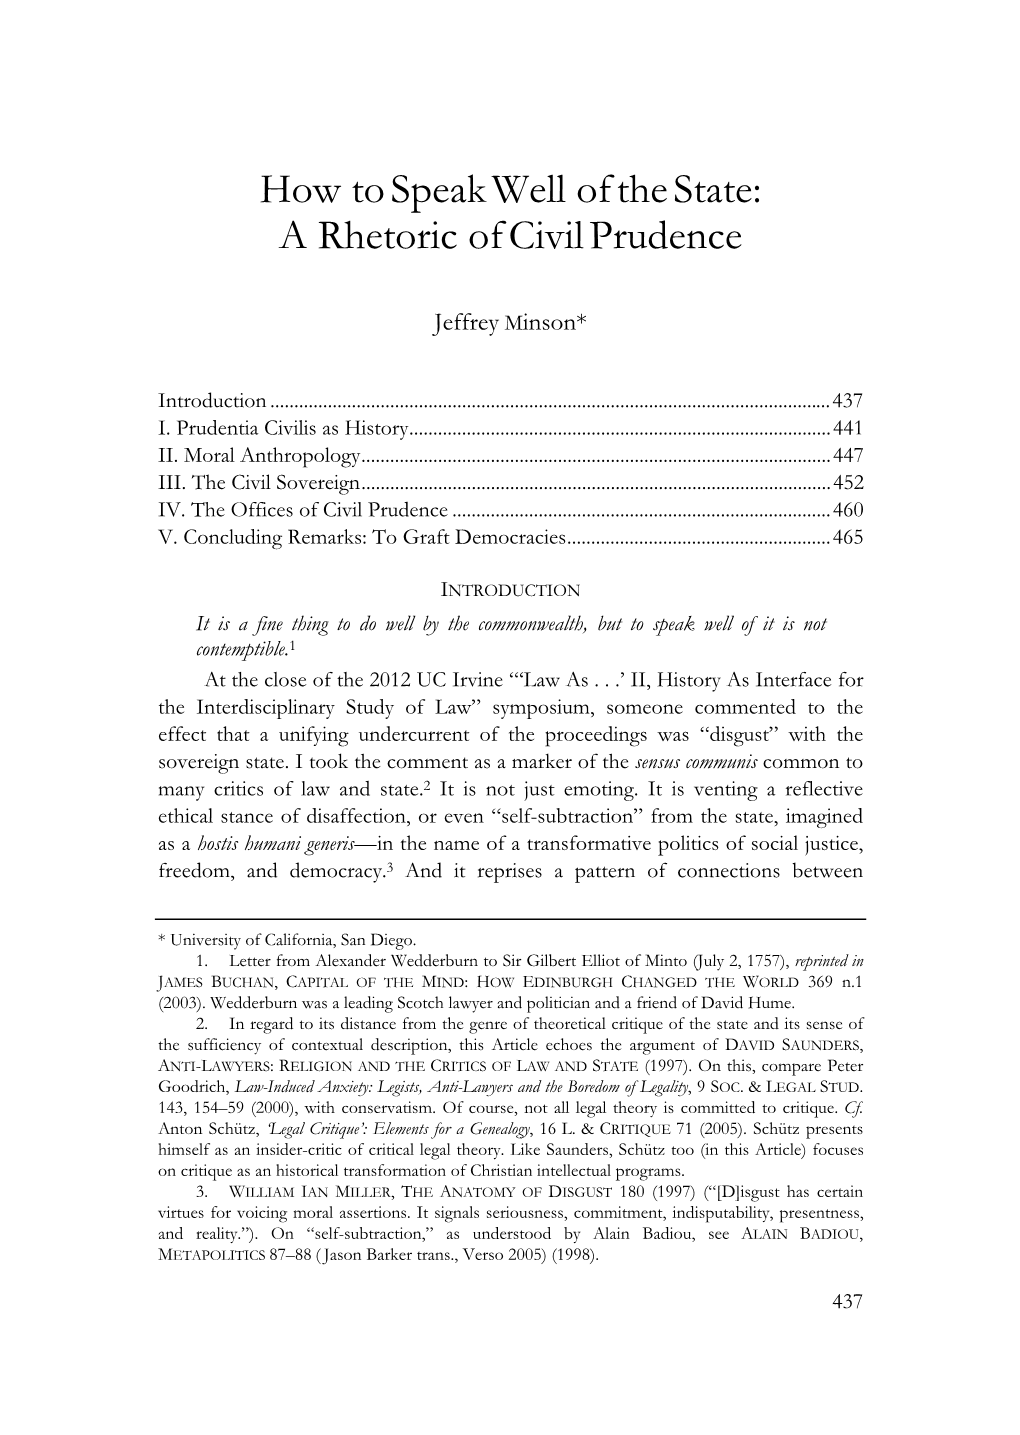 How to Speak Well of the State: a Rhetoric of Civil Prudence